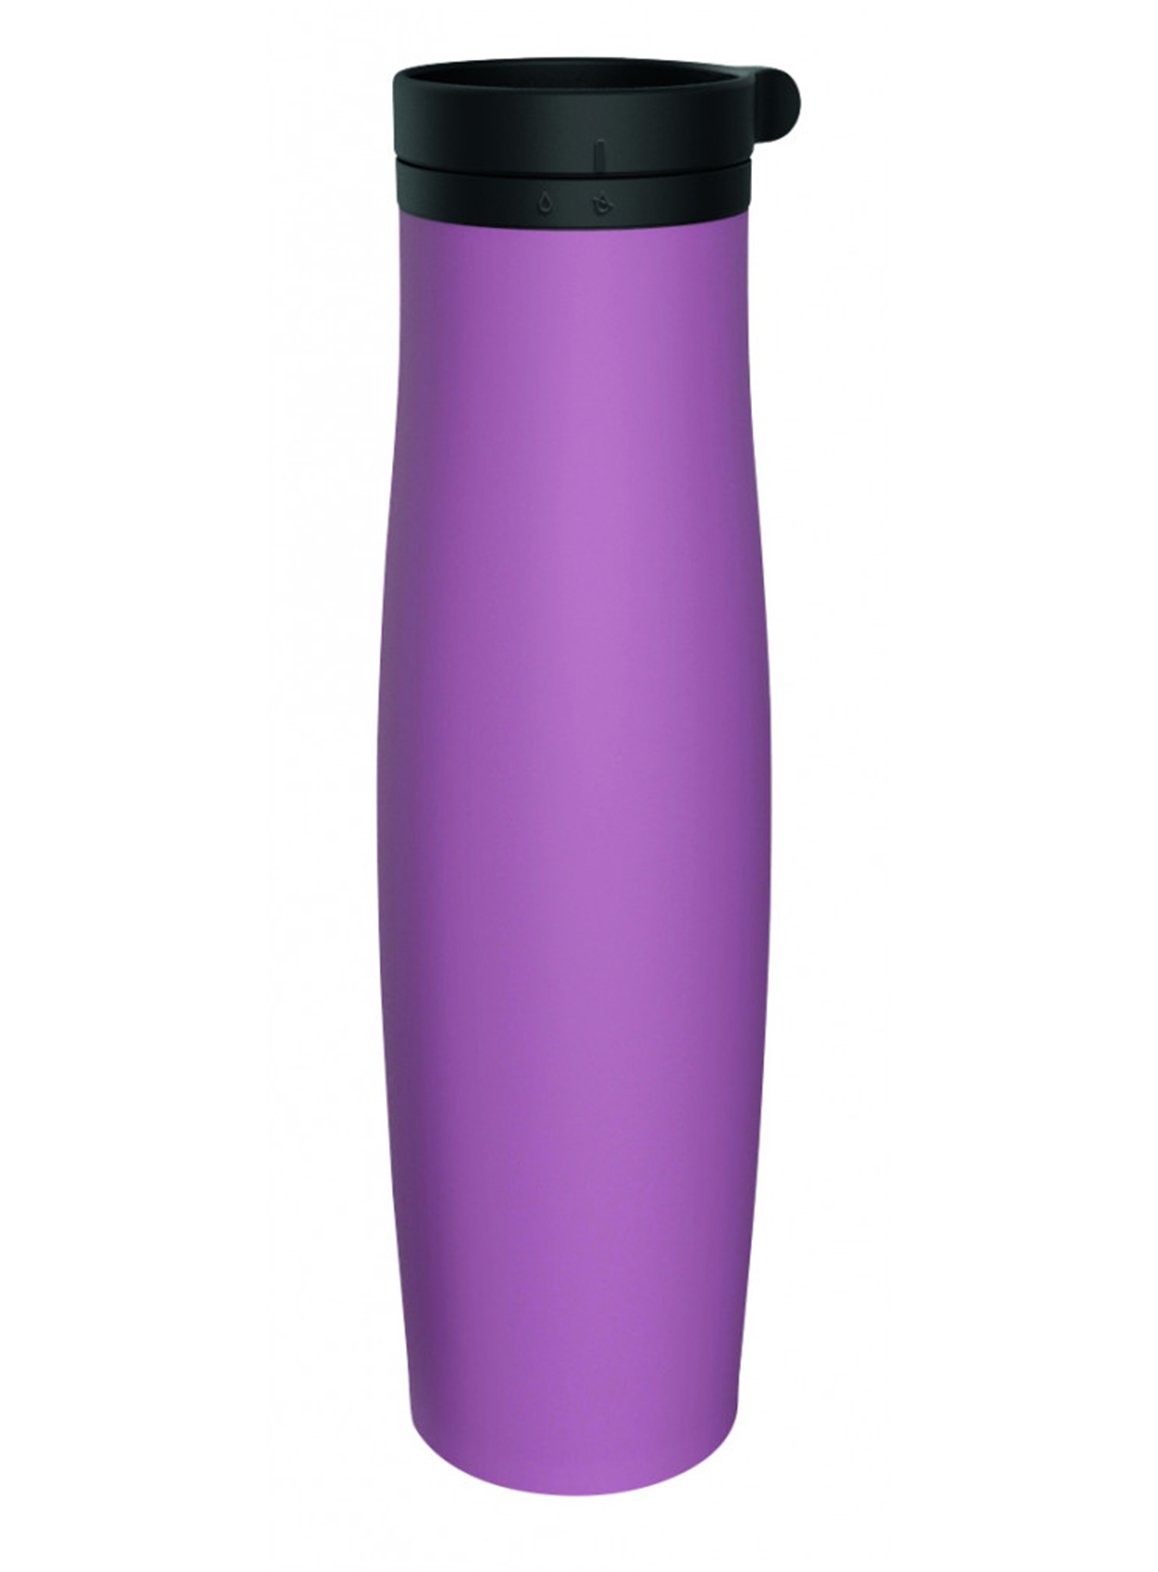 Camelbak Beck Insulated Stainless Steel Water Bottle - 20oz - Lilac - 2019 Lilac  